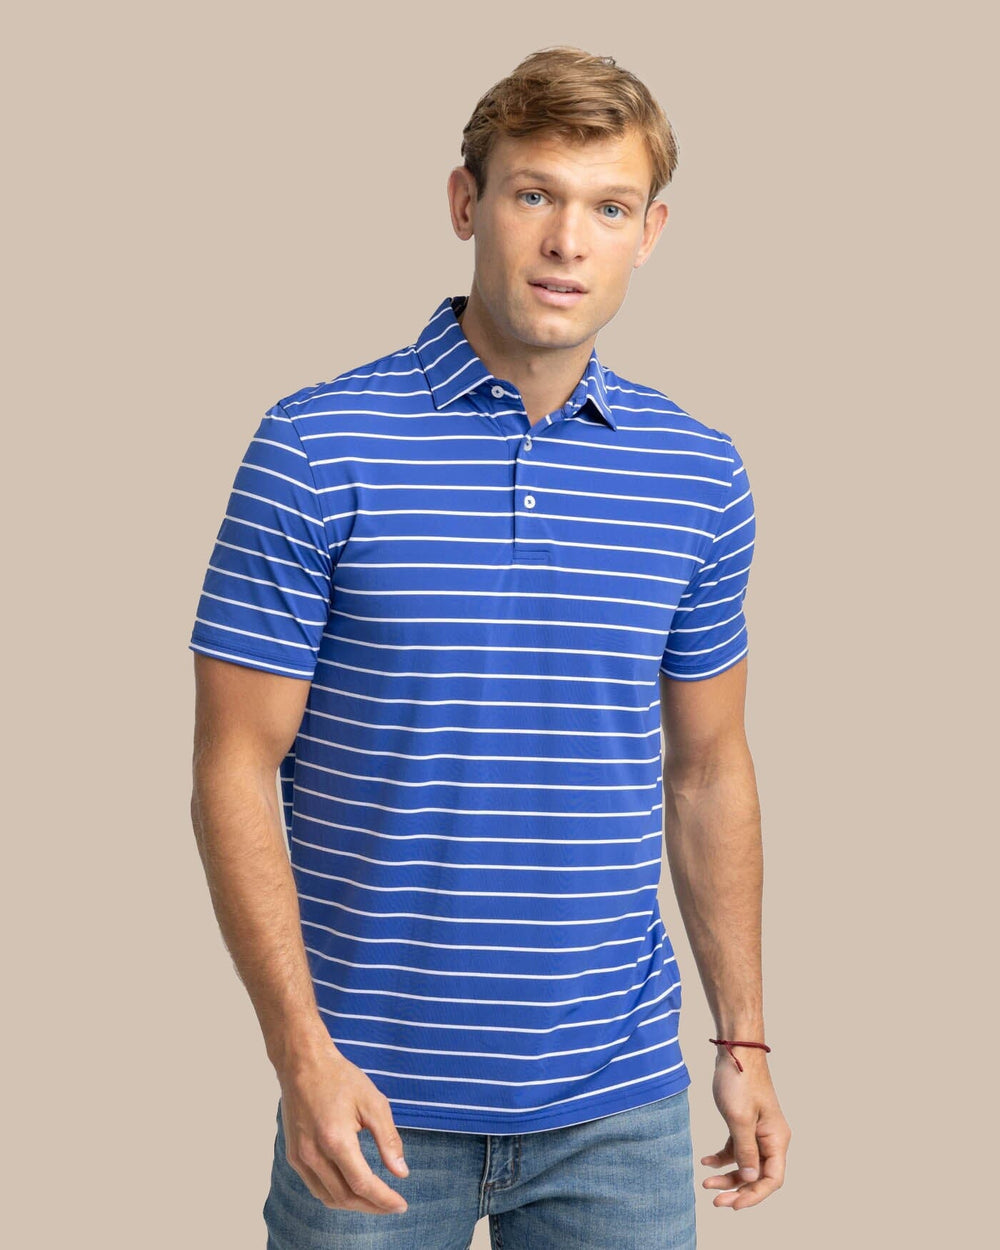 The front view of the Southern Tide brrr-eeze Desmond Stripe Performance Polo by Southern Tide - University Blue